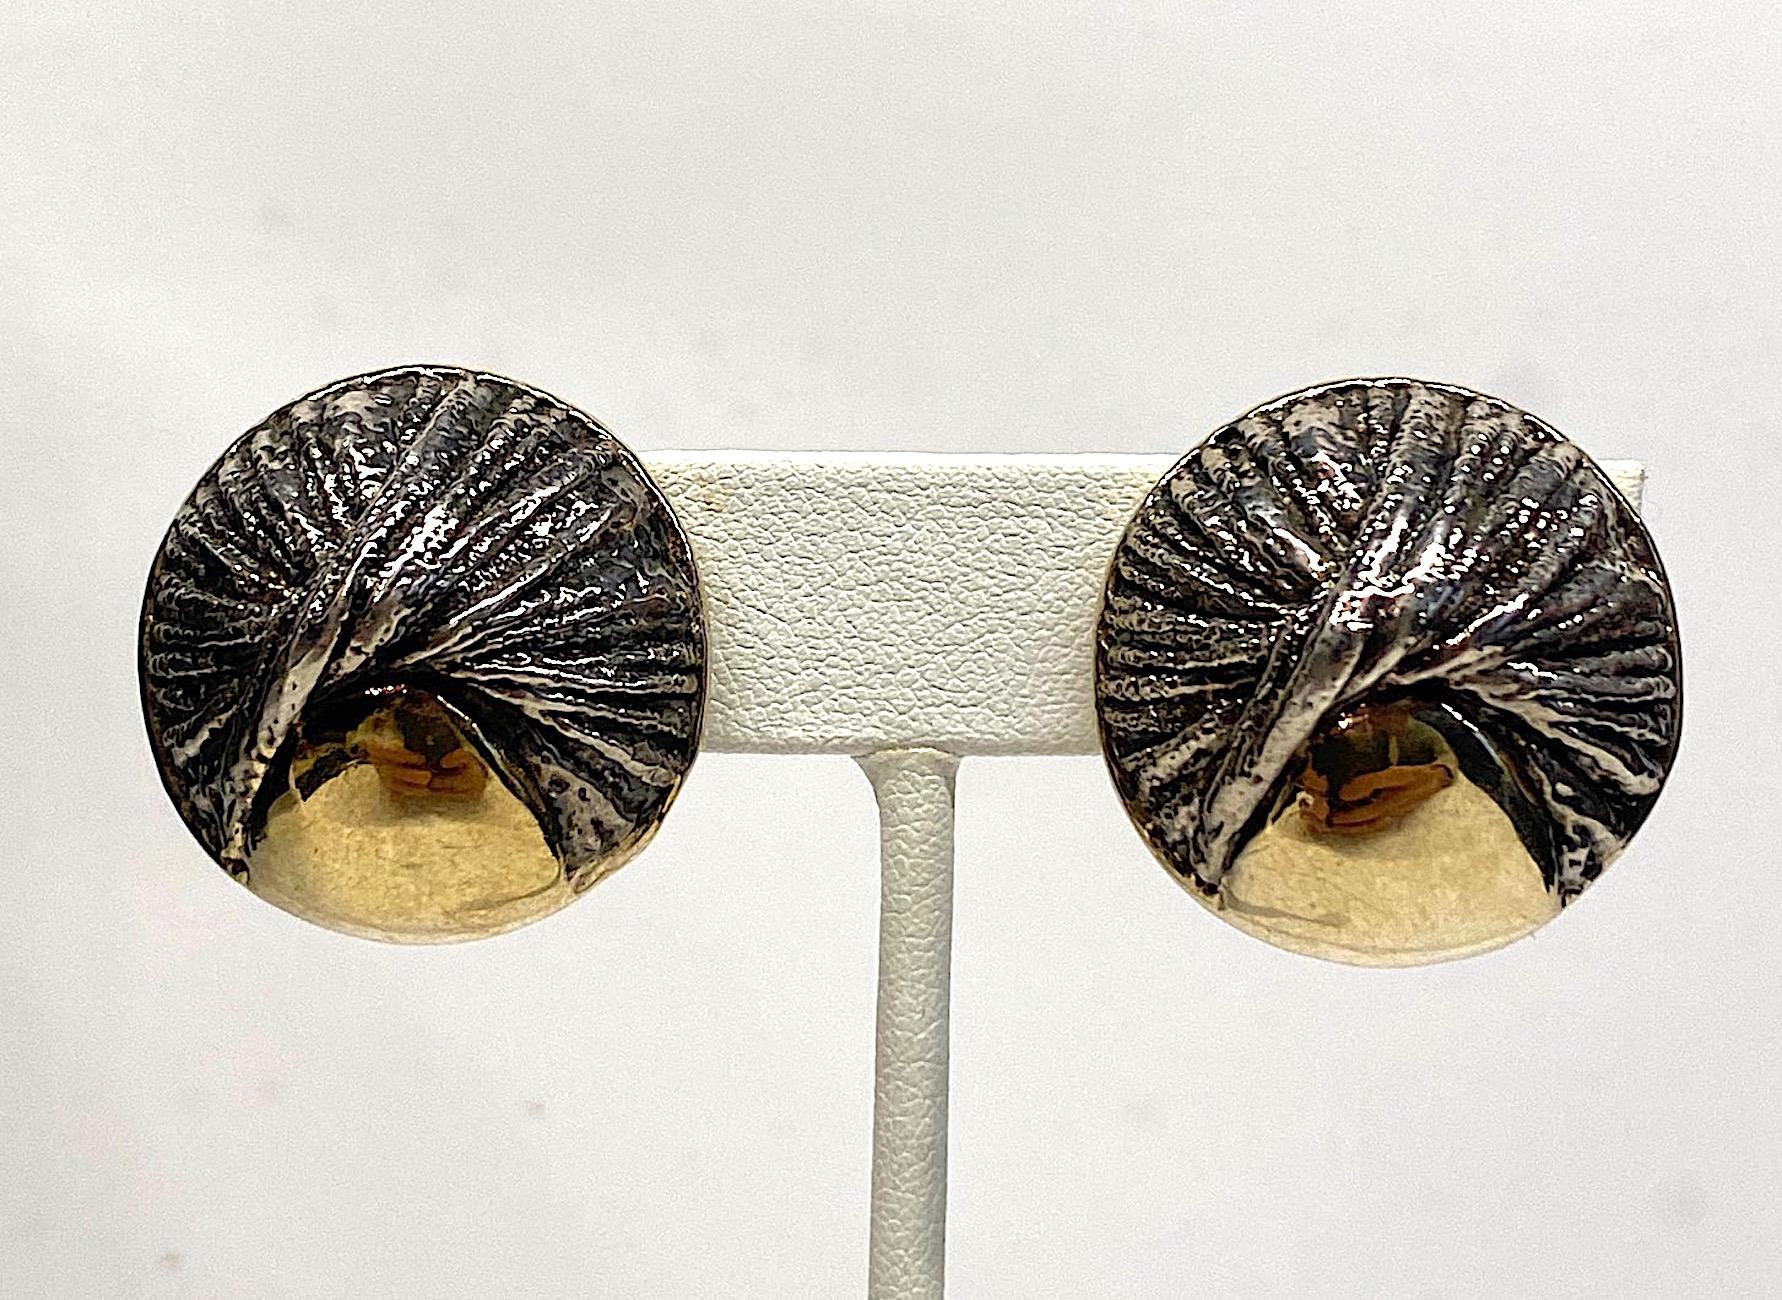 
Hand made pair of abstract modernist earrings in sterling silver with gold plate. The dome button style earrings have a sculptural quality with a patinated sterling twist design . Next to the twist is a gold plate area which nicely compliments the